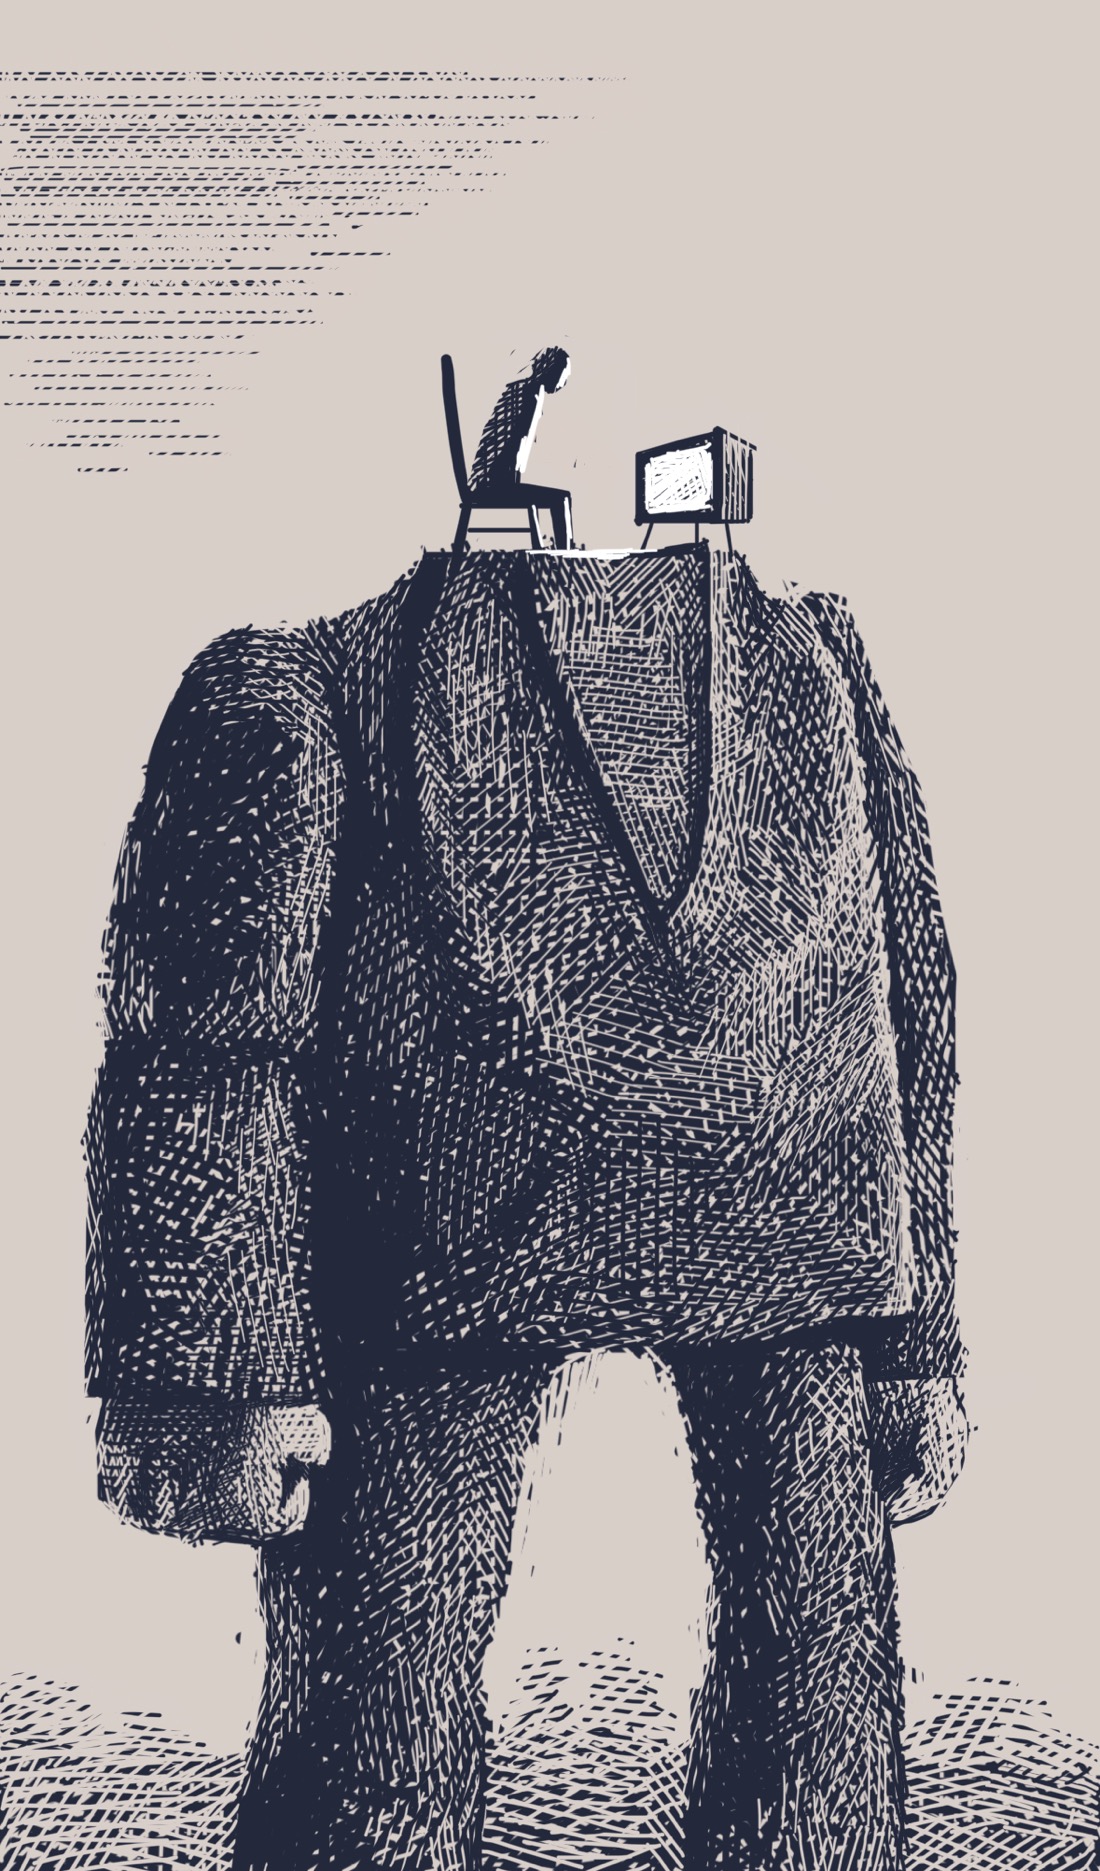 A huge, somewhat robotic-looking figure, arms stiffly at its sides, hands balled into fists. It looks like a large person wearing an unremarkable pair of pants and coat. Where the figure's head would be sits a person on a chair, watching a boxy, old-style television. The background is indeterminate: suggestions of clouds, and a blurry horizon.